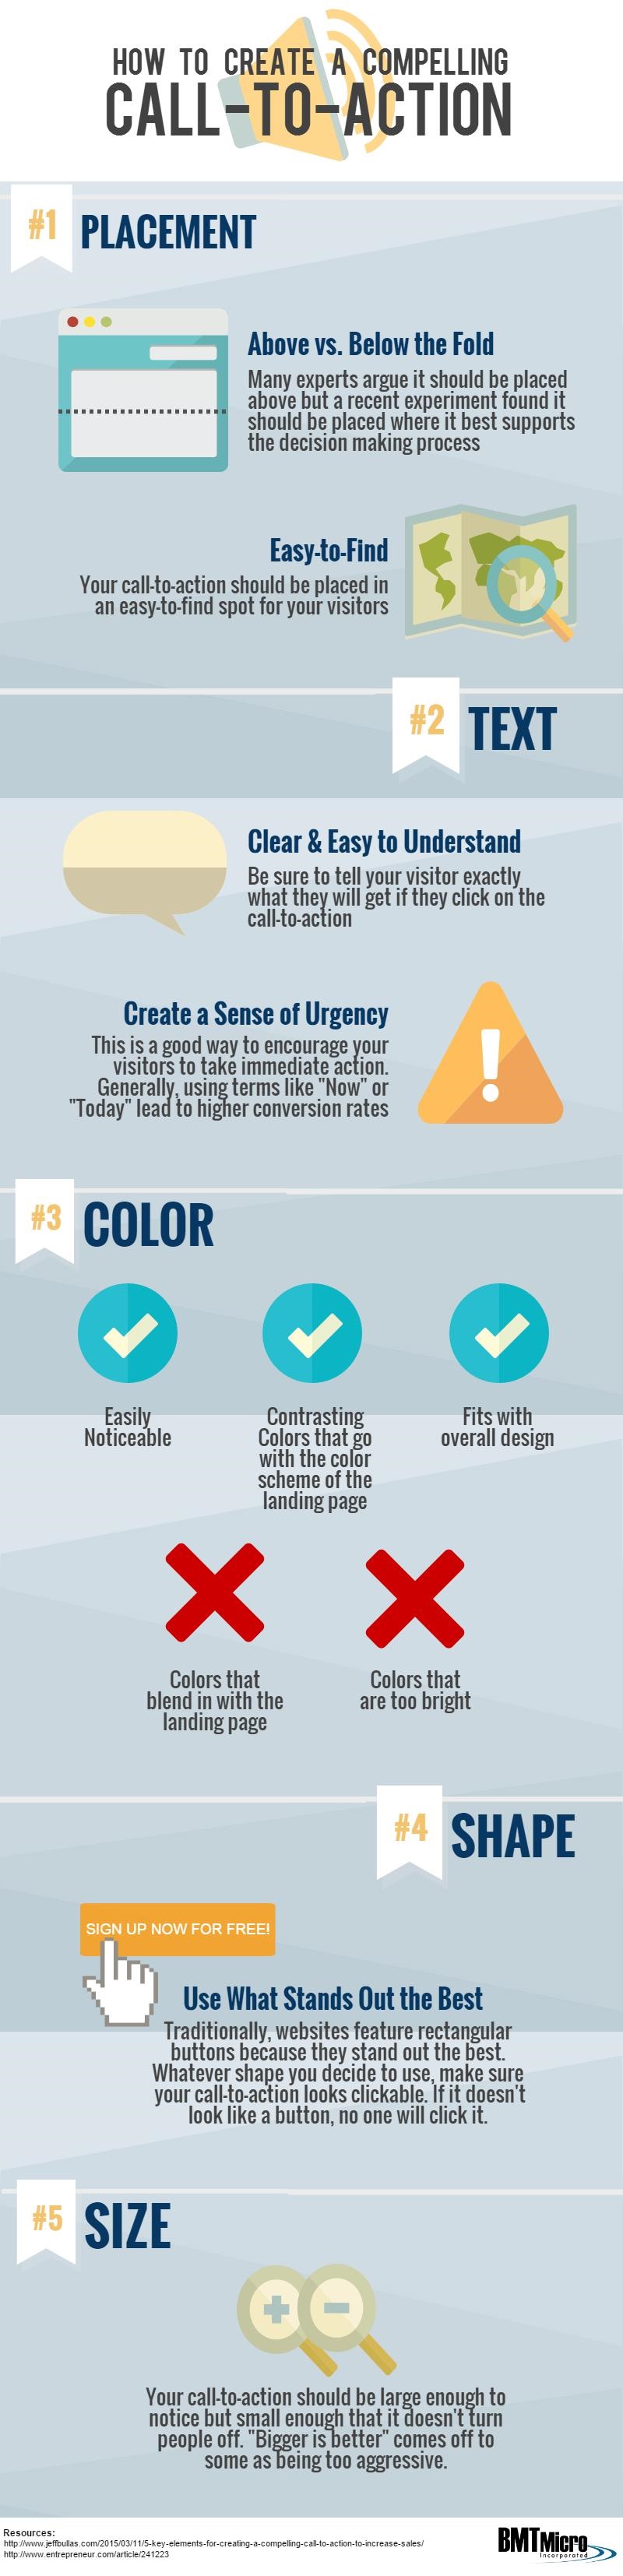 Call-to-Action Infographic (2)